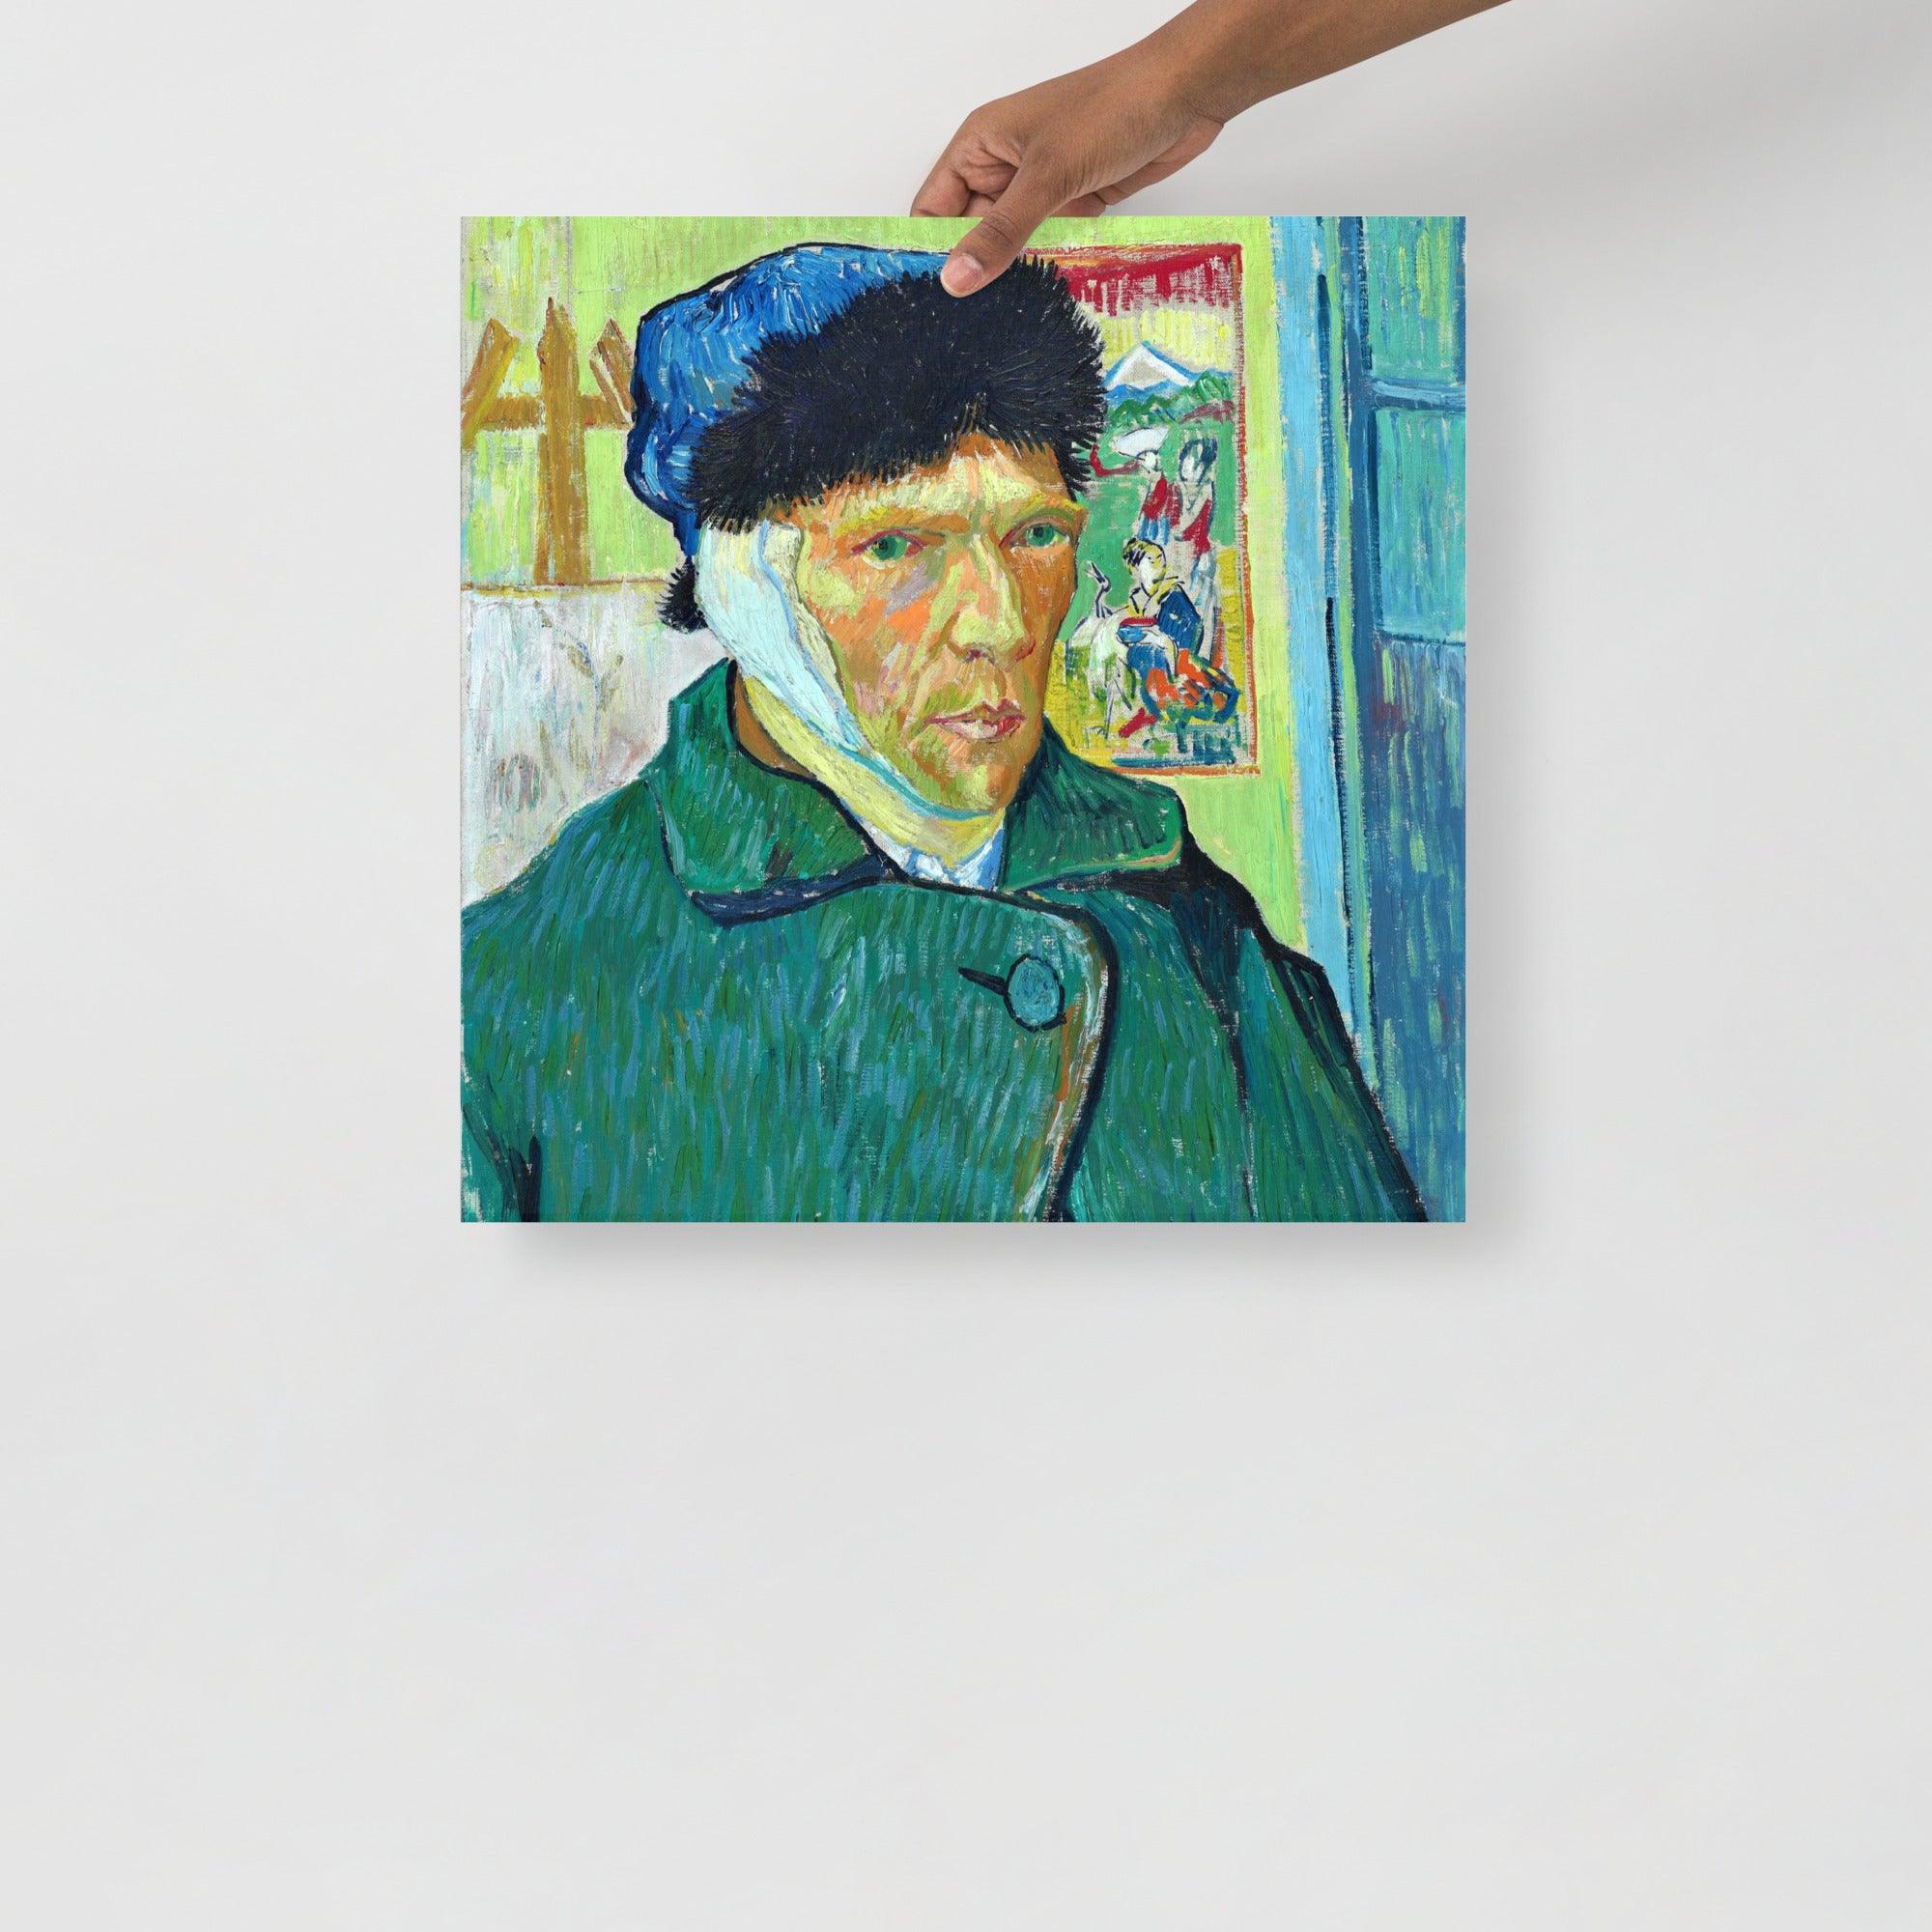 A Self Portrait With Bandaged Ear by Vincent Van Gogh poster on a plain backdrop in size 18x18”.